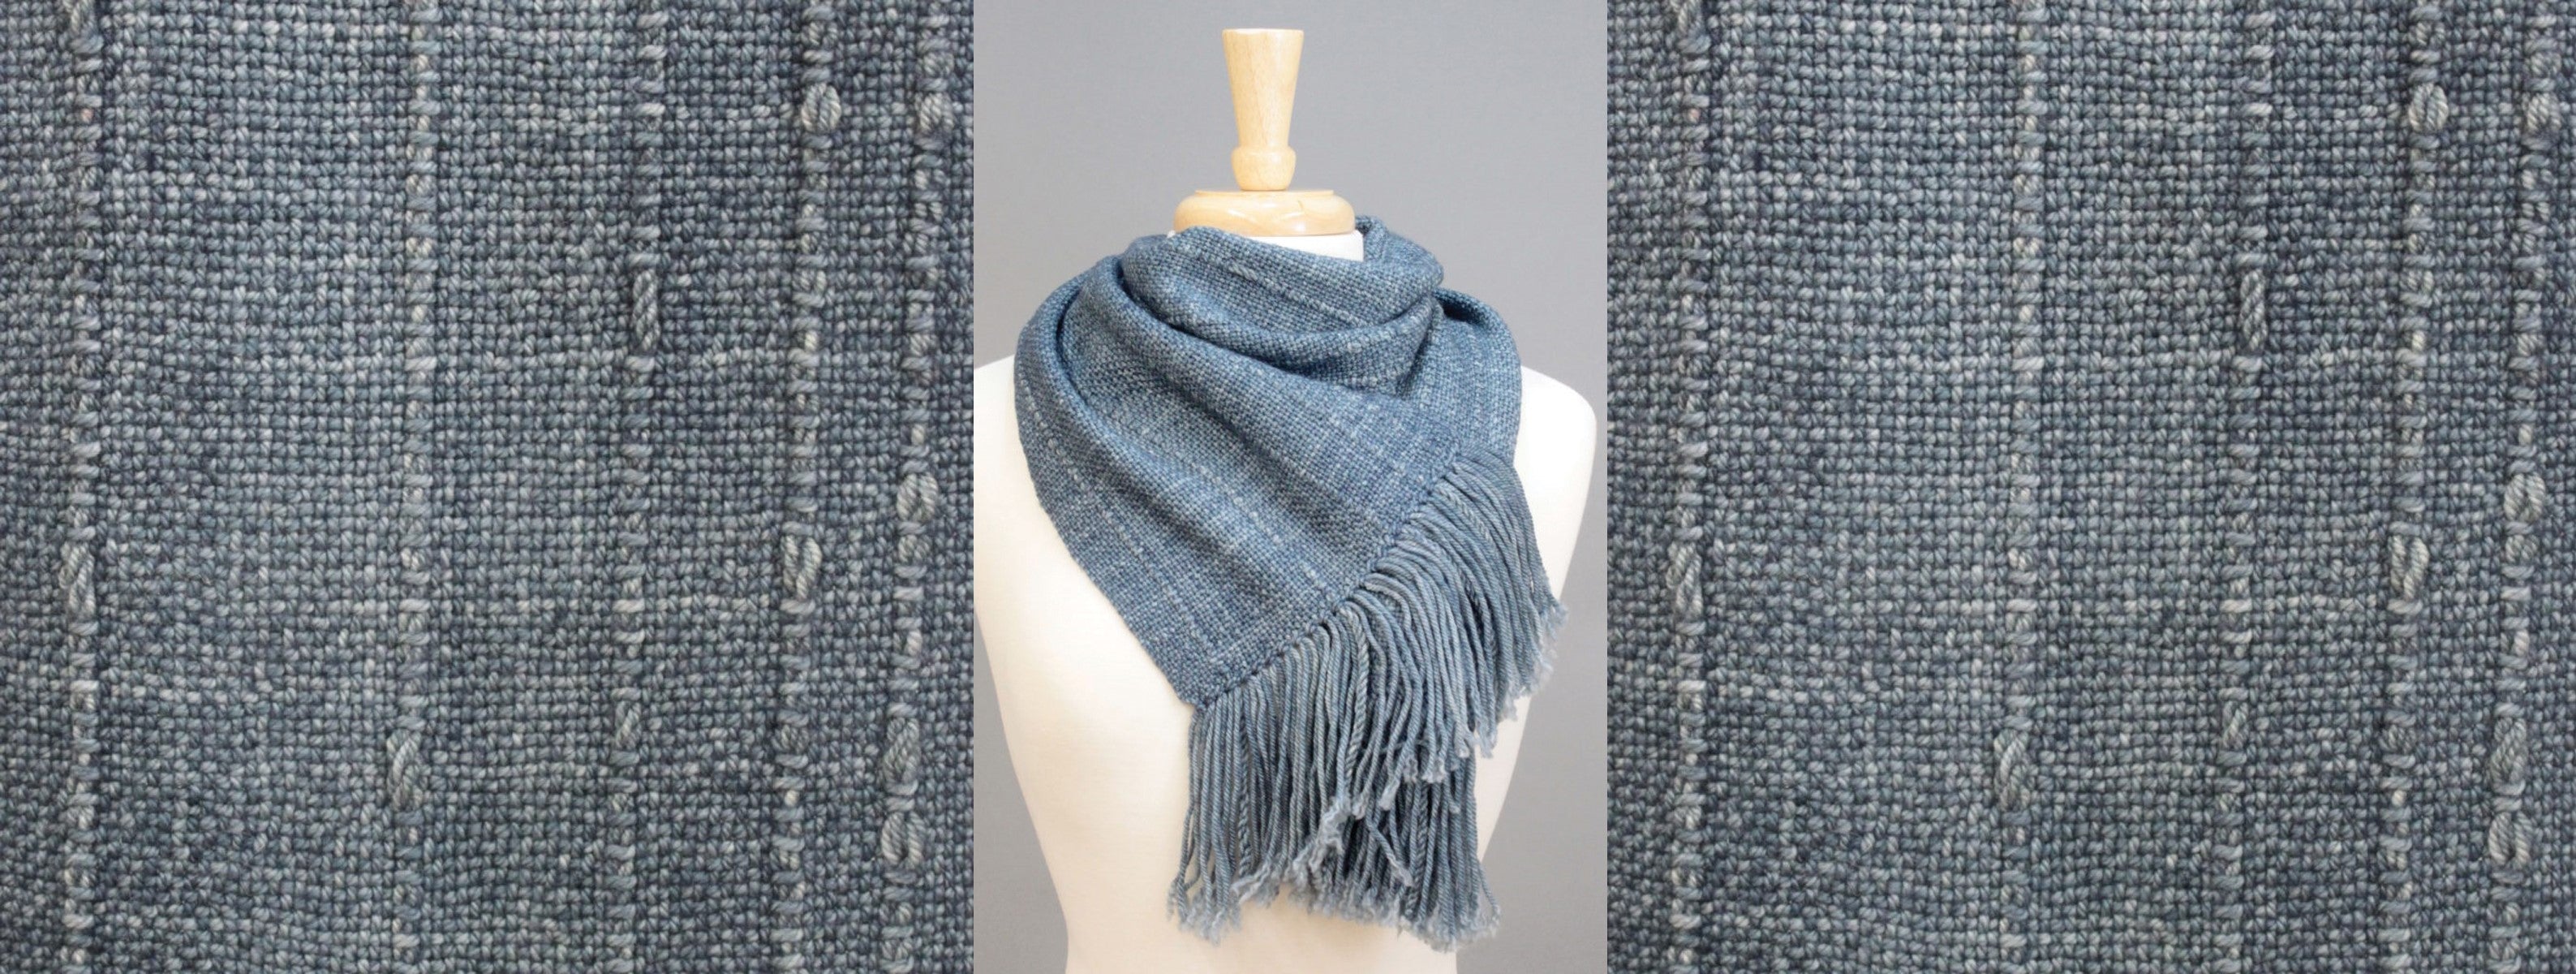 If My Old Favorite Jeans Were a Scarf - Anzula Luxury Fibers Collaboration